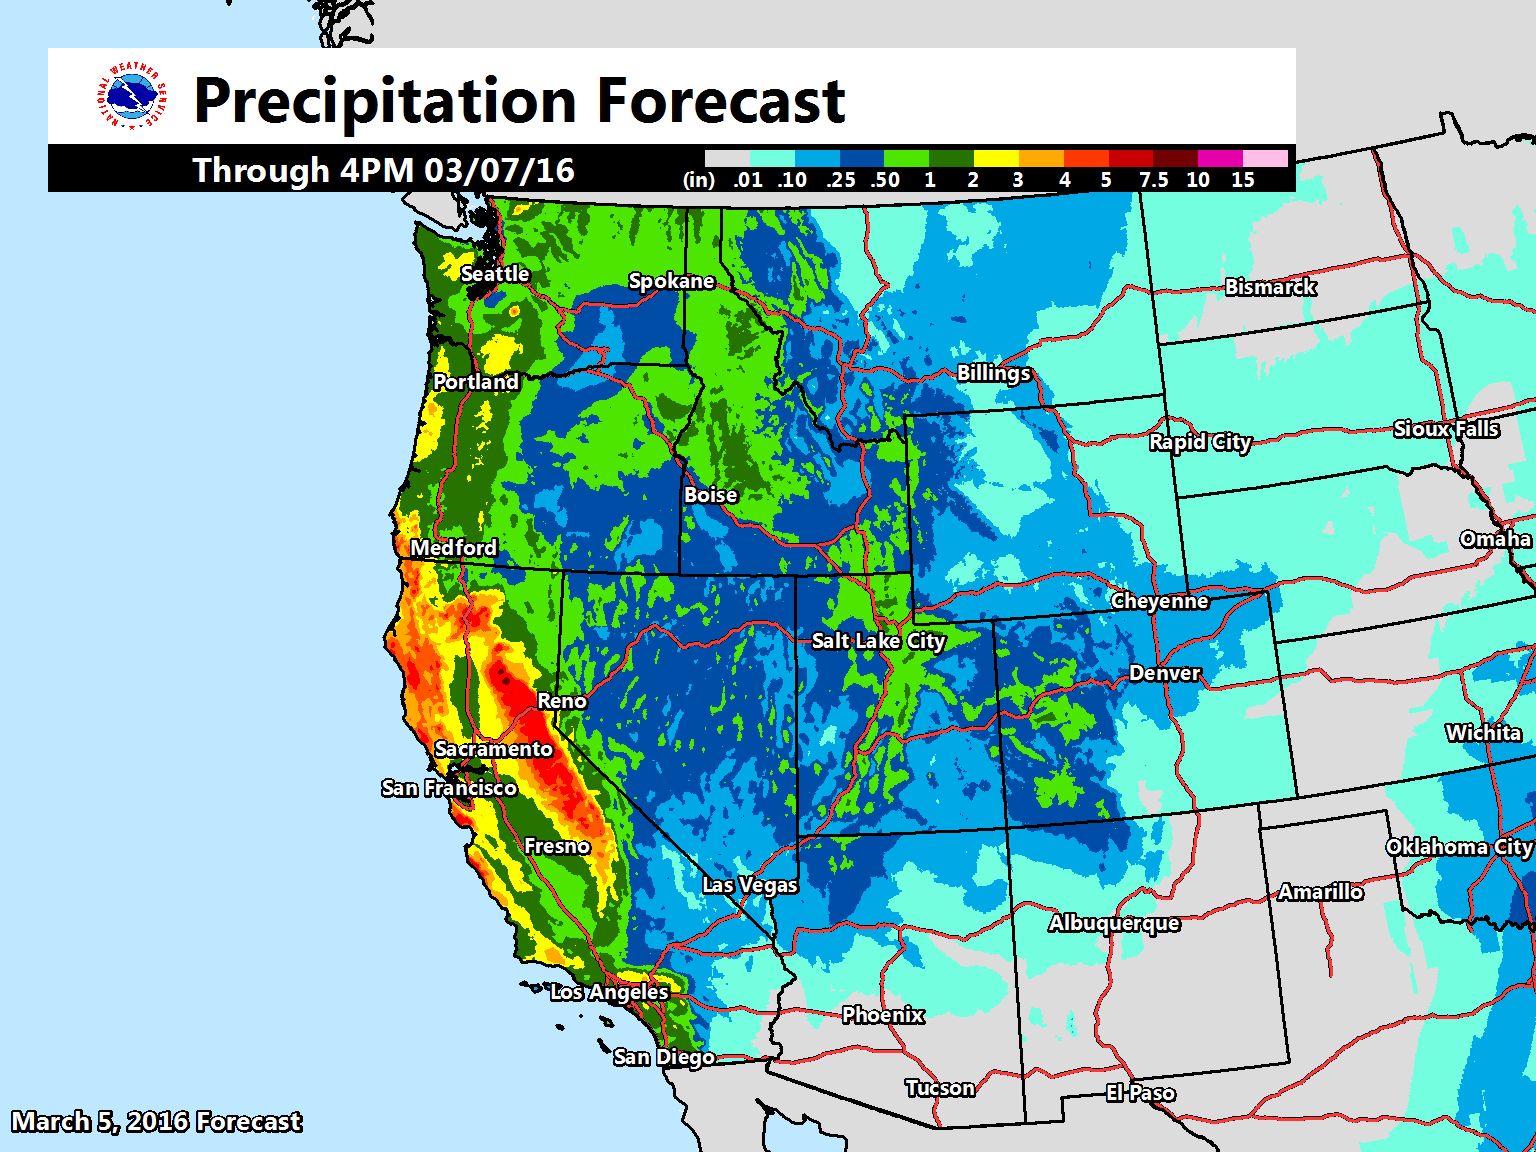 "Wet conditions expected across much of the western U.S. over the next 3 days." - NOAA, today